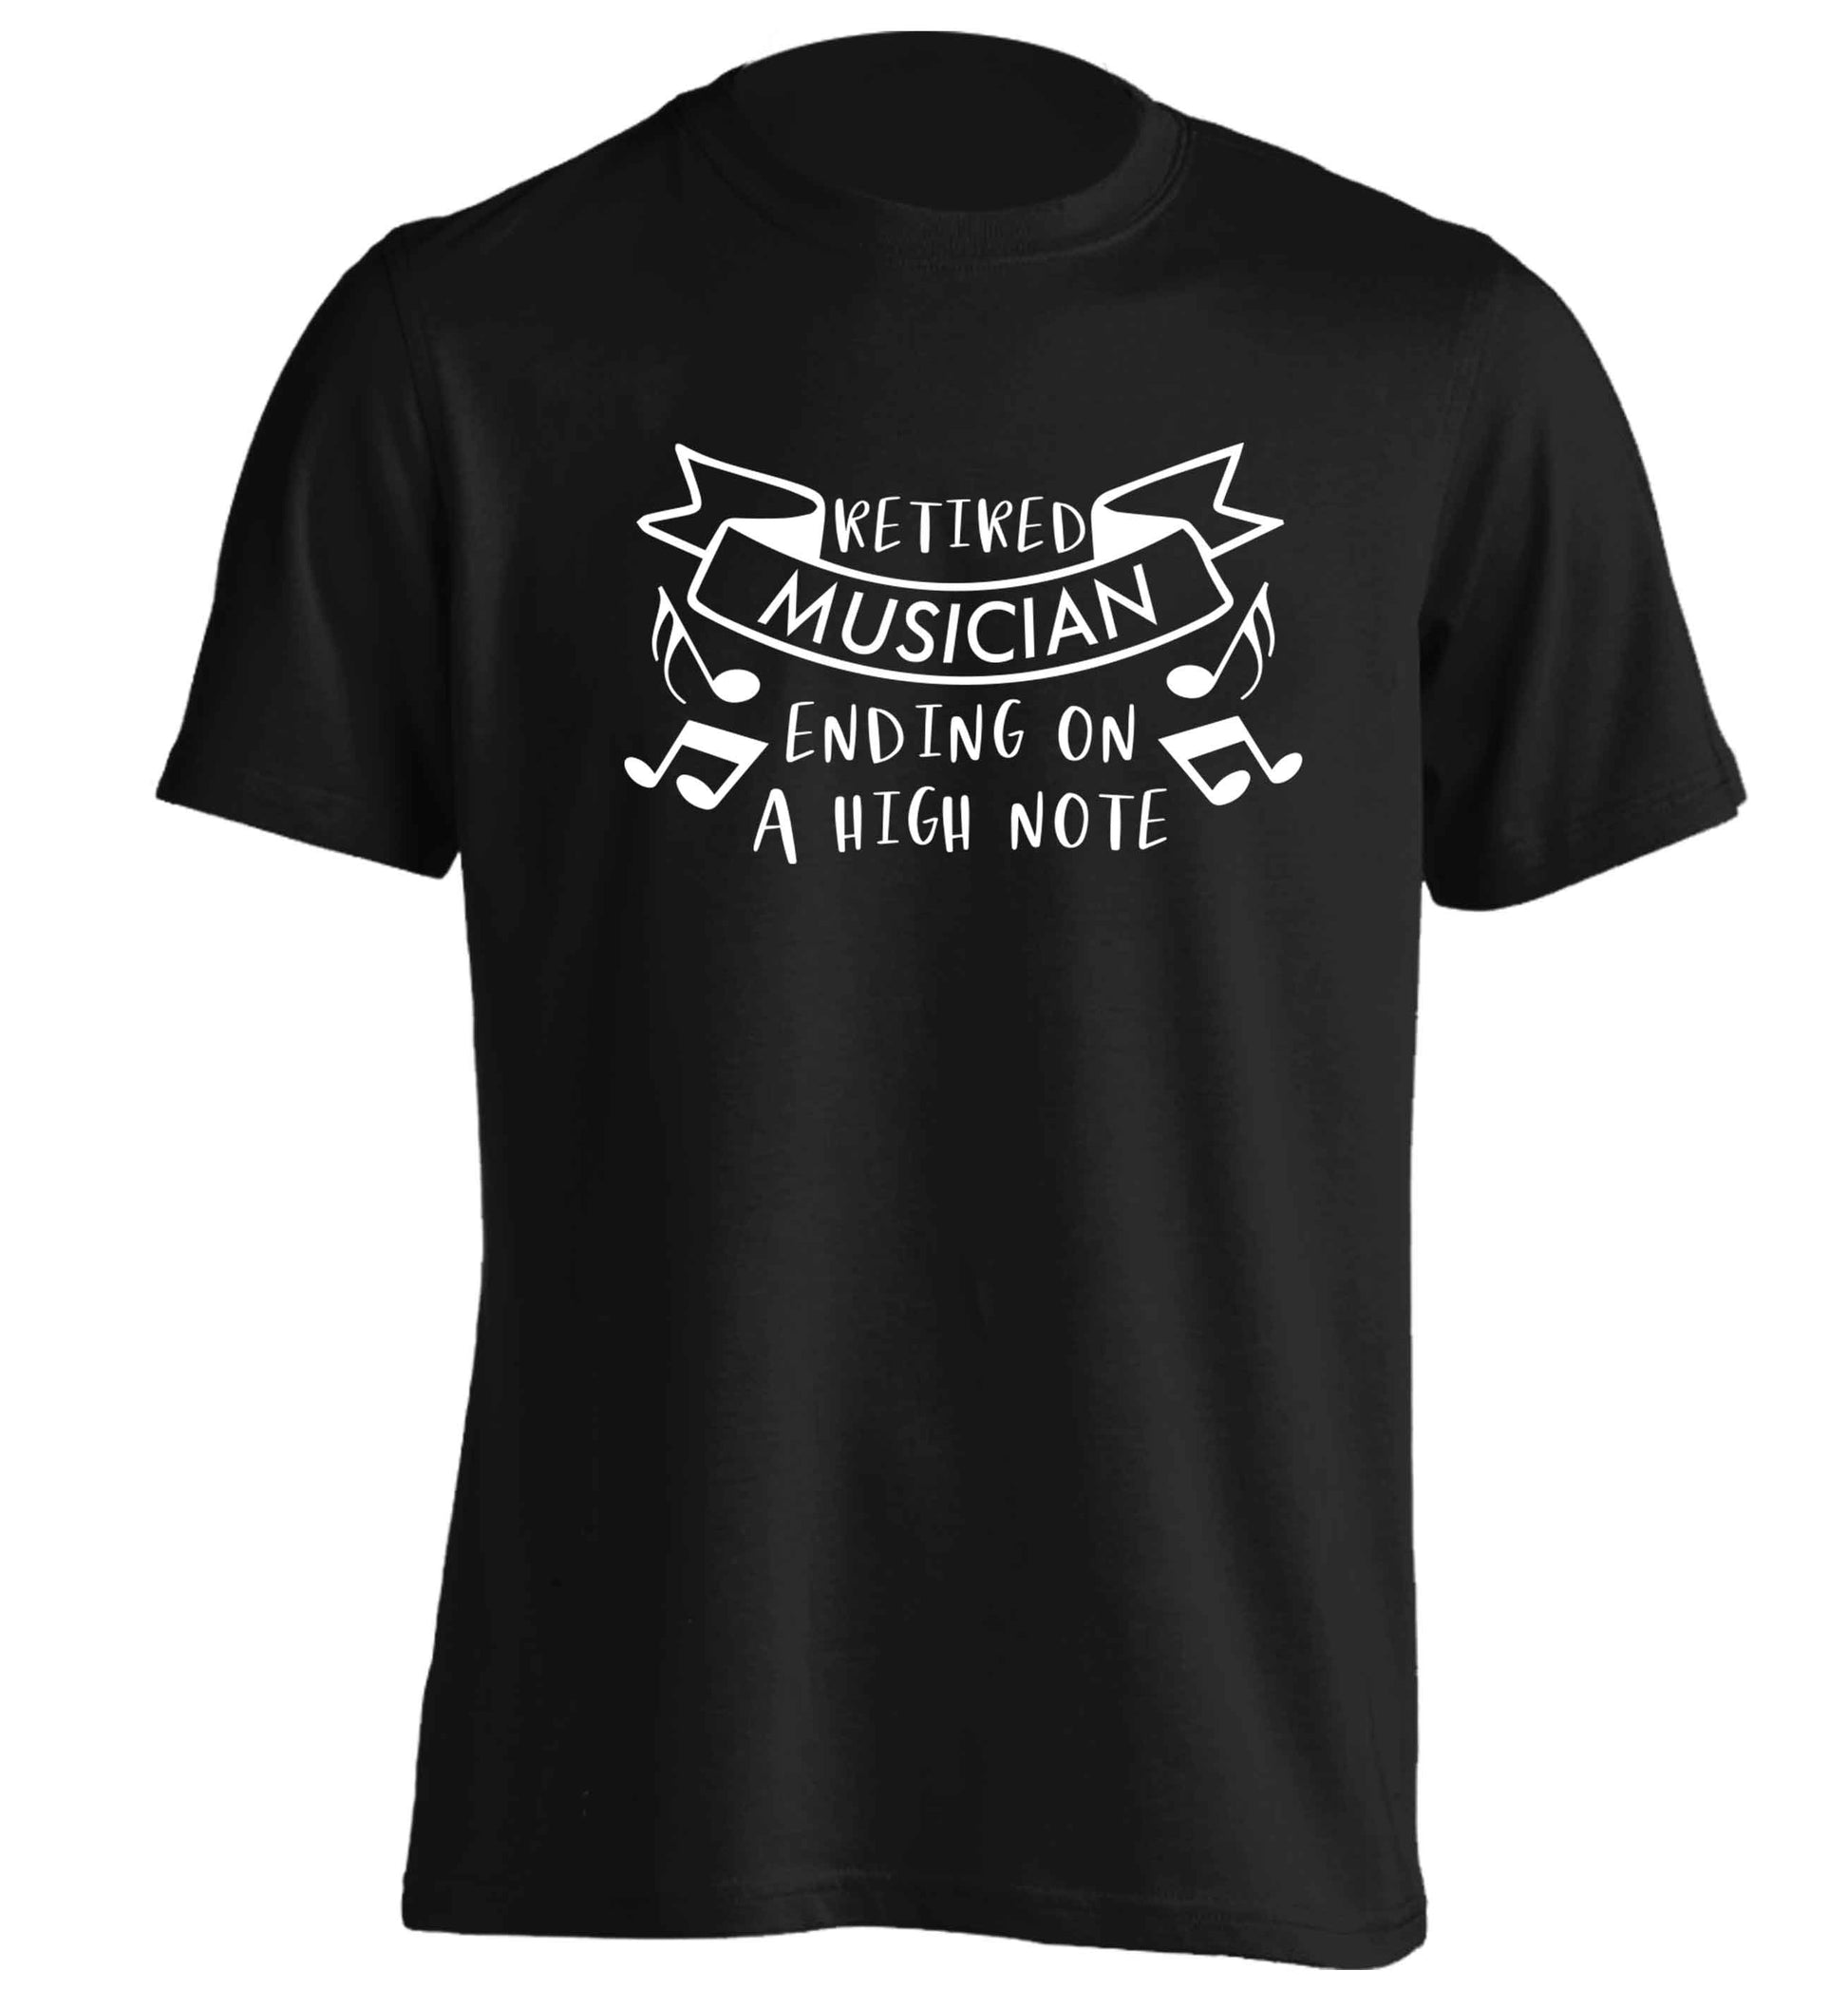 Retired musician ending on a high note adults unisex black Tshirt 2XL